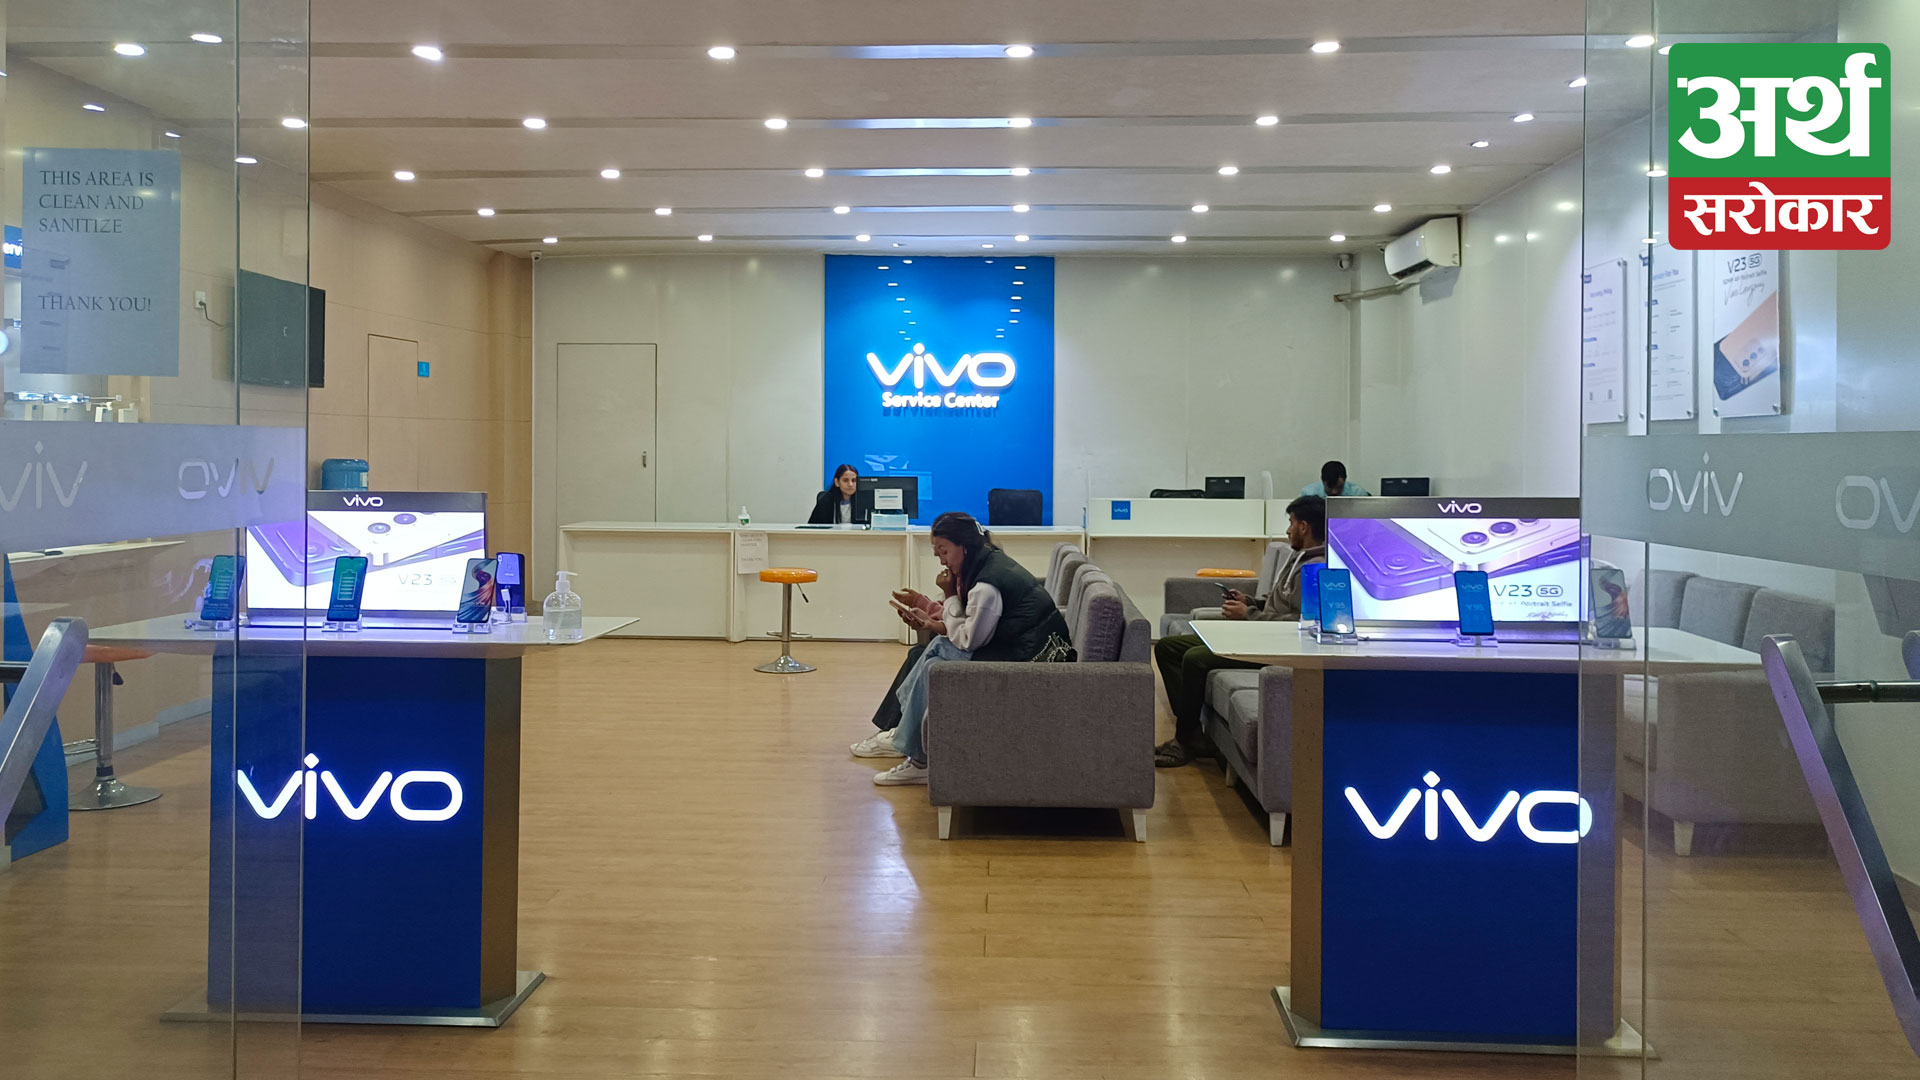 From Purchasing a Smartphone to Ensuring Proper After-Care, vivo Supports its Customers At Every Step